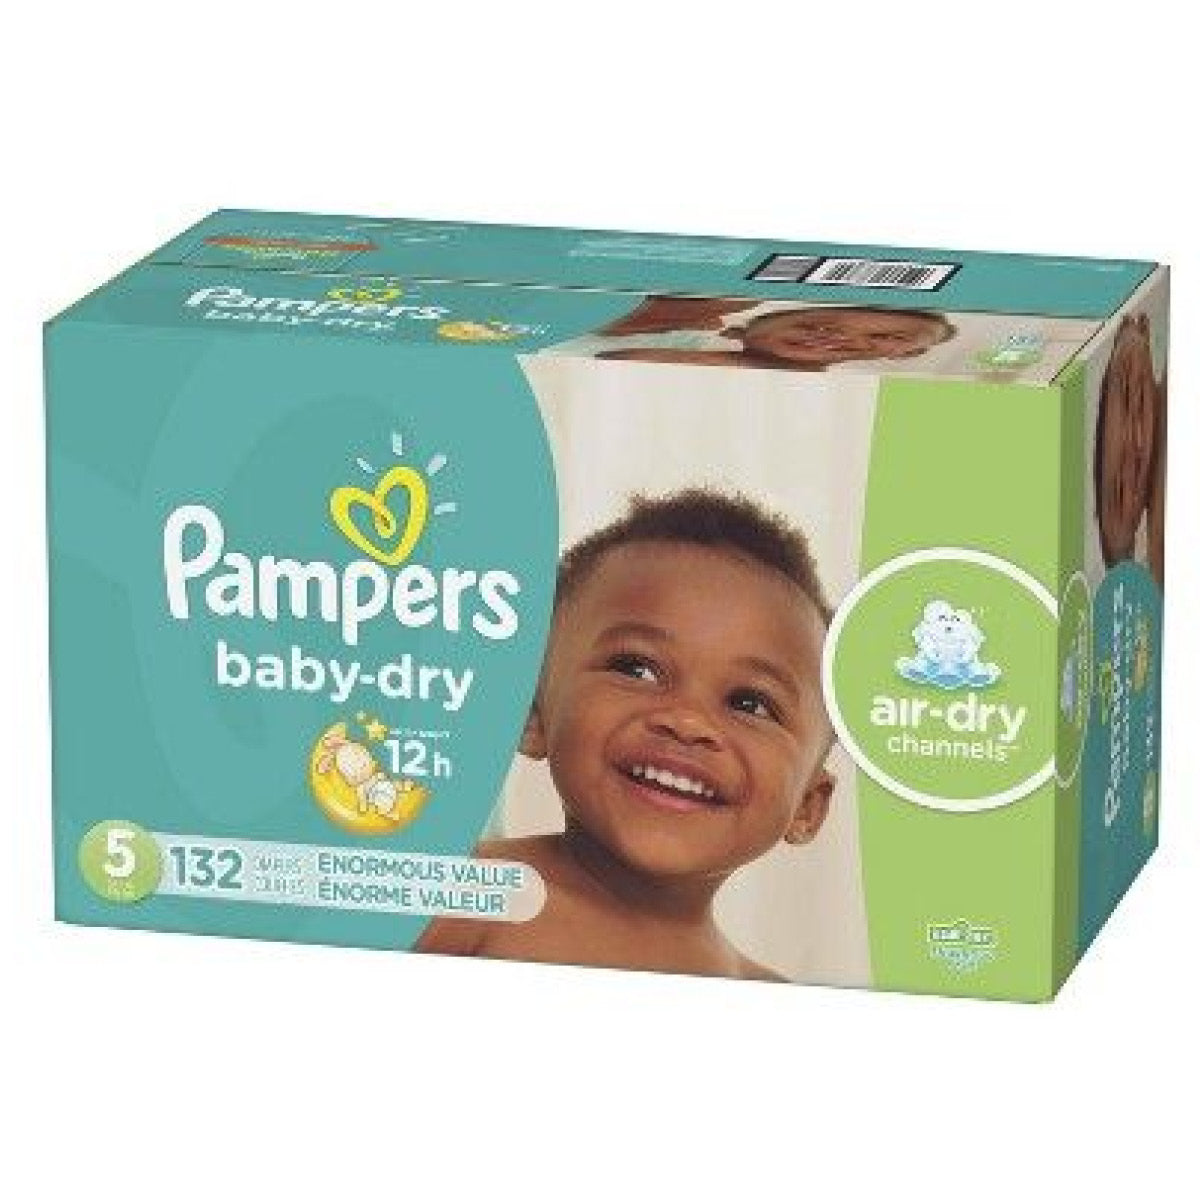 Pampers Baby Dry Diapers Size 5, 132pk